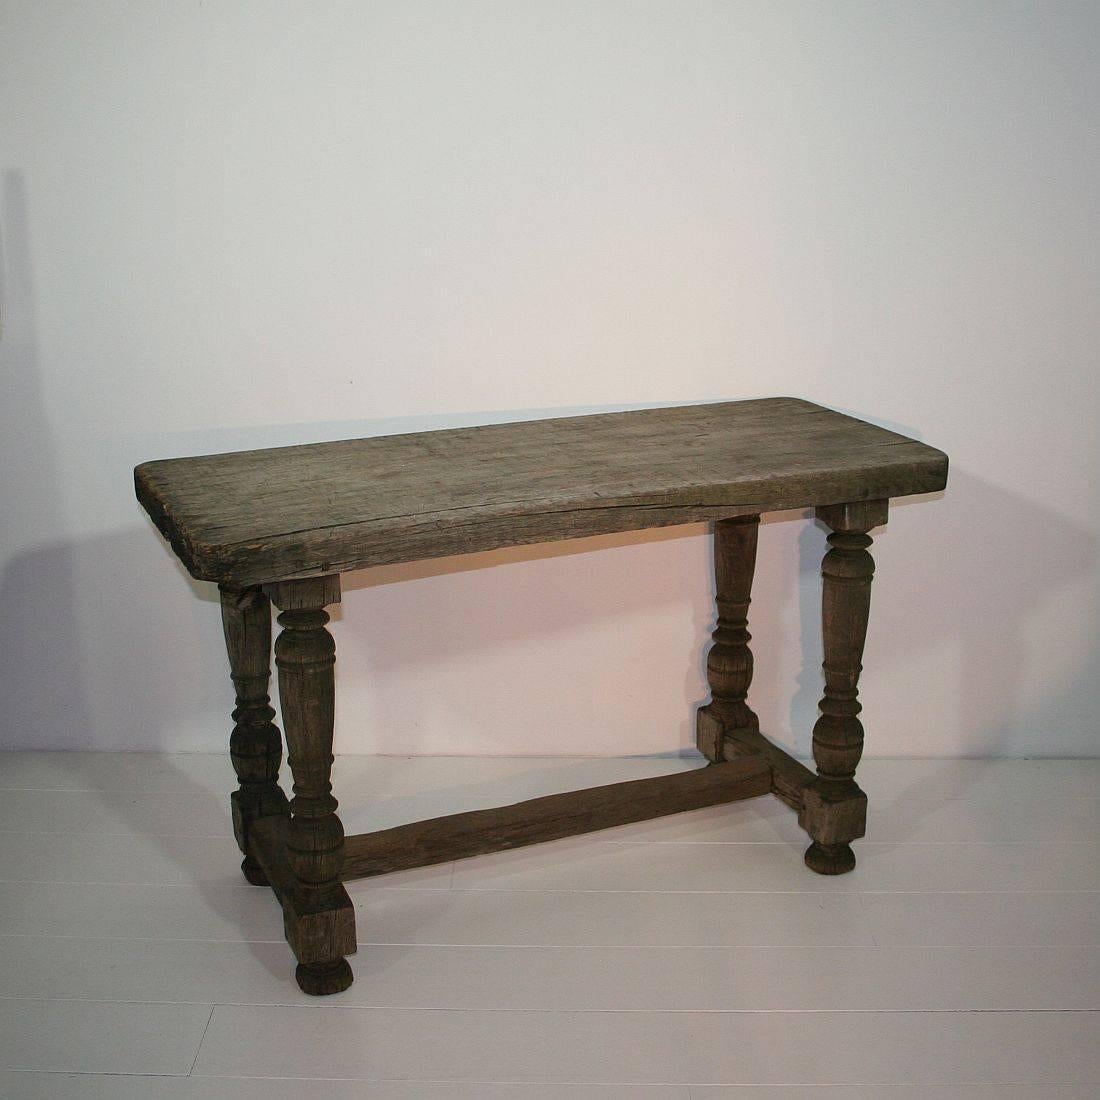 Rustic French 18th-19th Century Weathered Oak Table